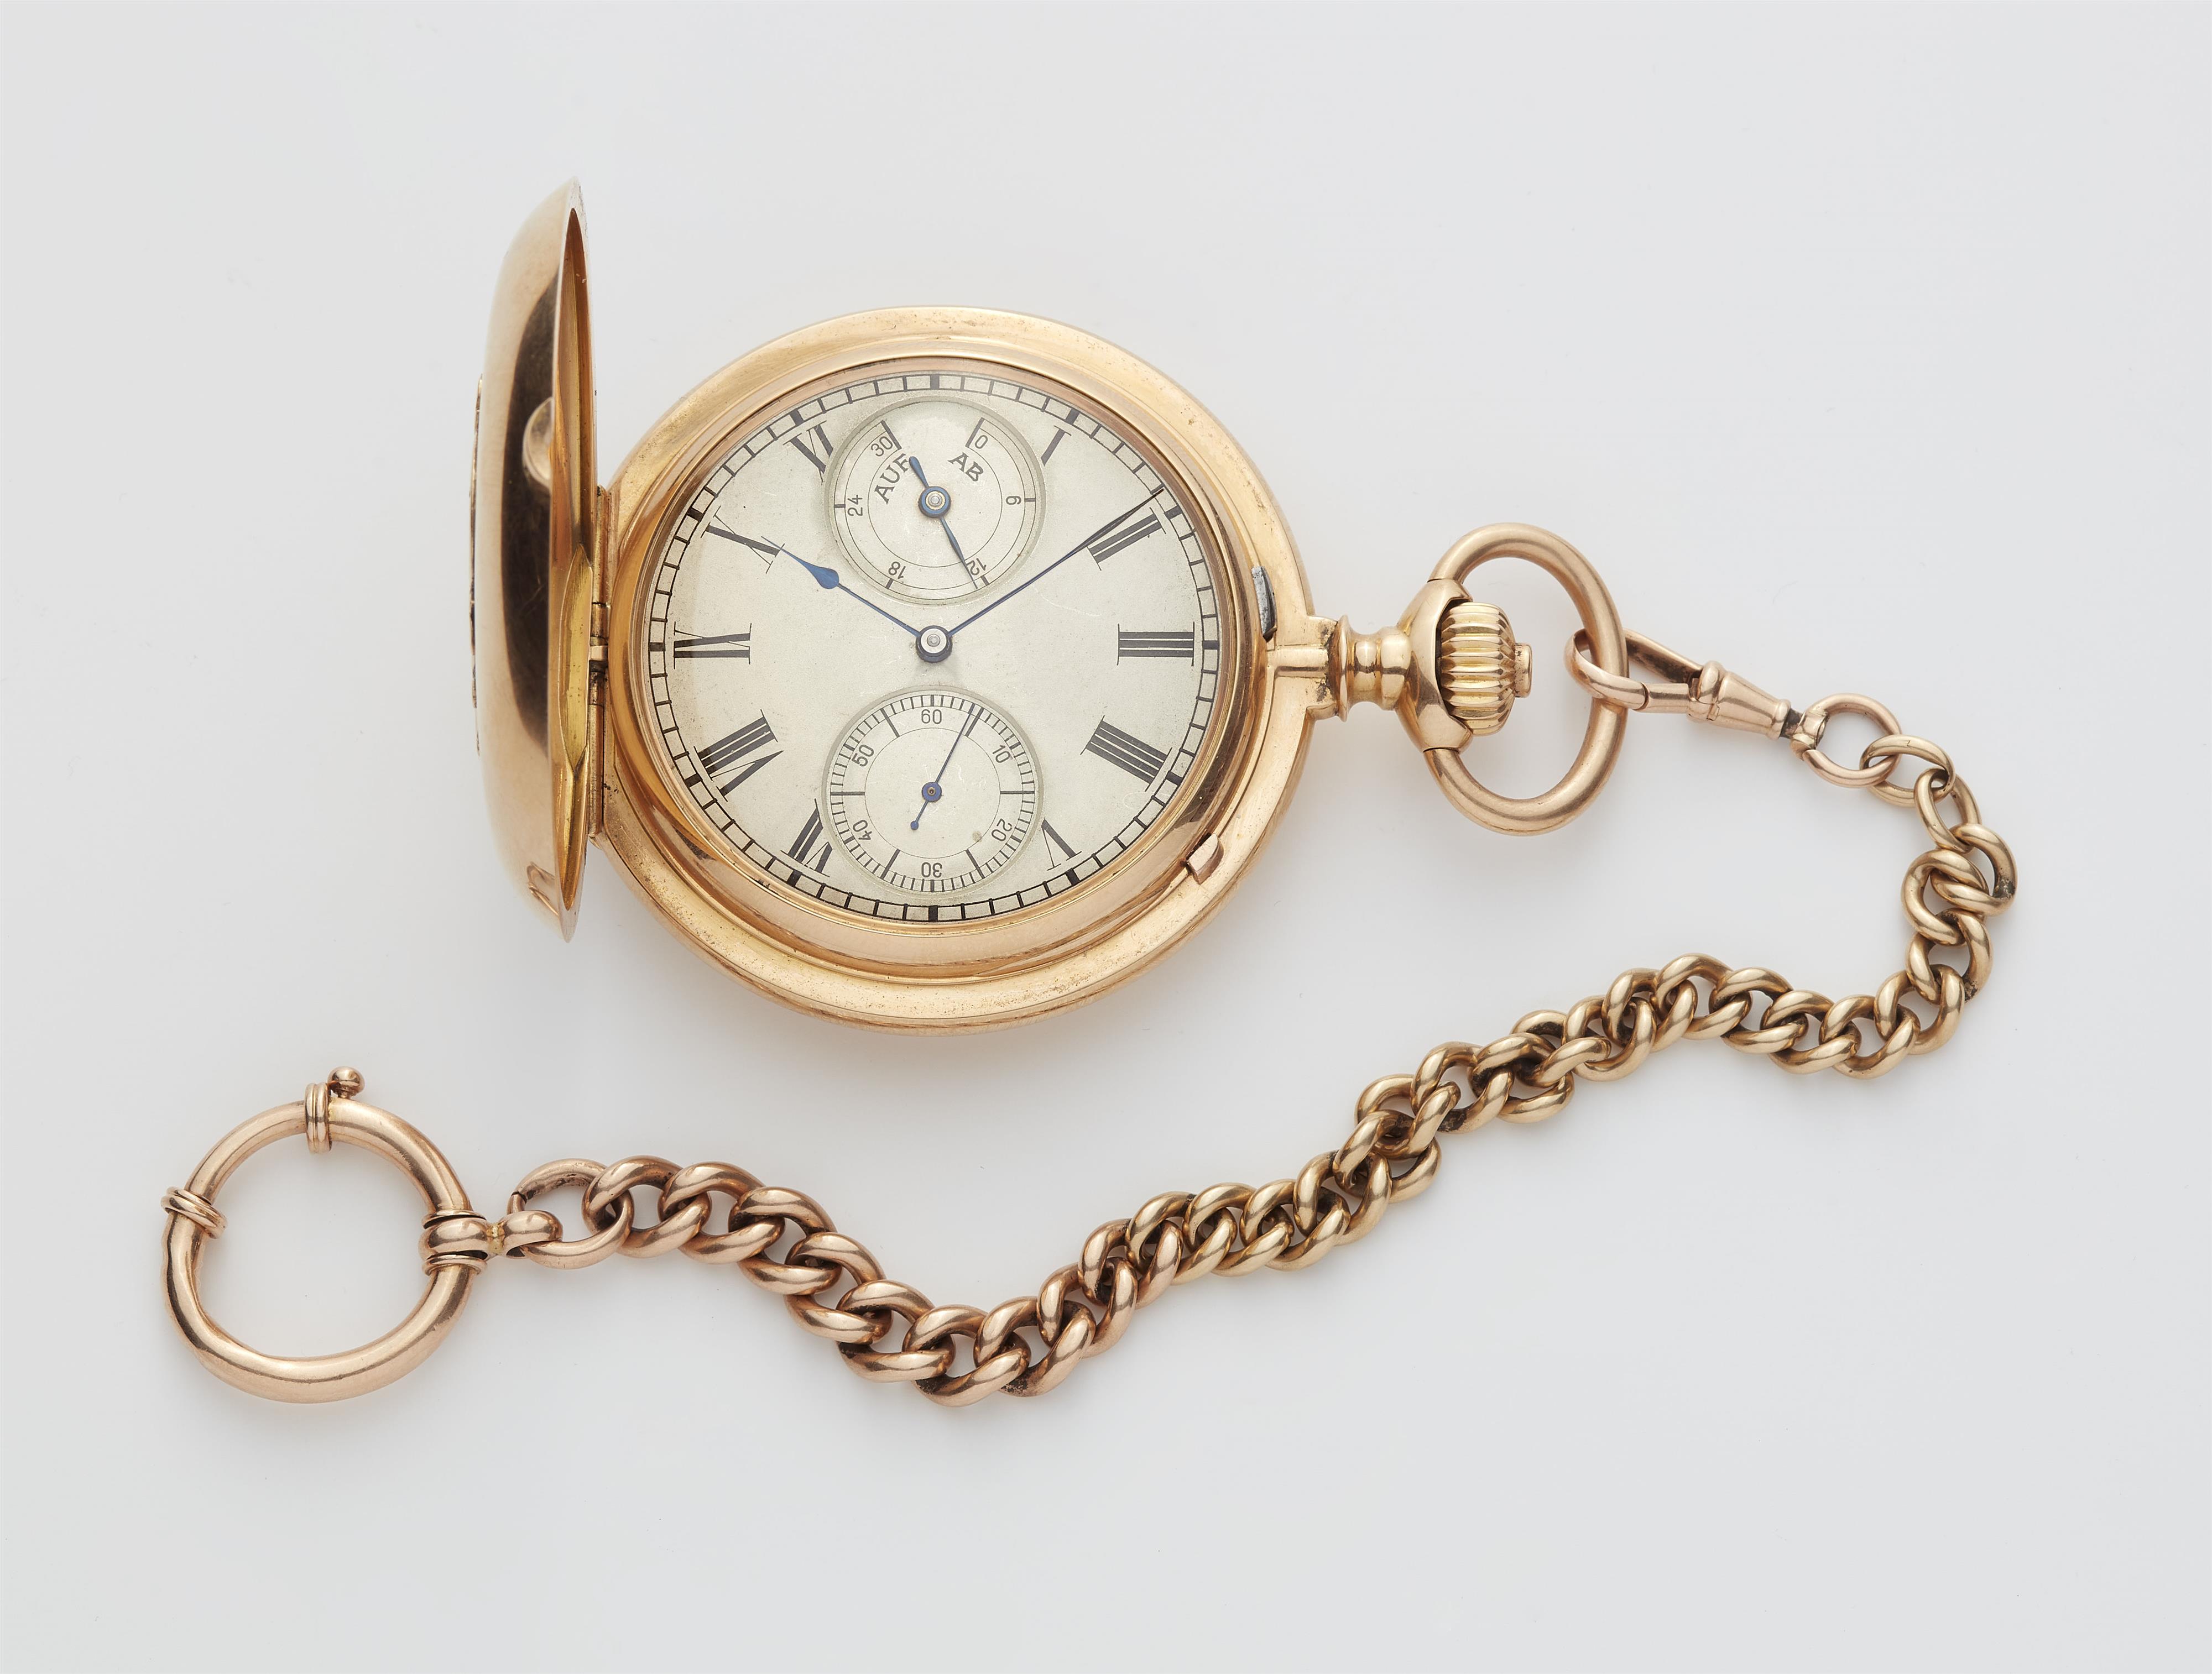 A very rare 18k rose gold A. Lange & Söhne carousel savonette pocket watch with extract form the archives. - image-1